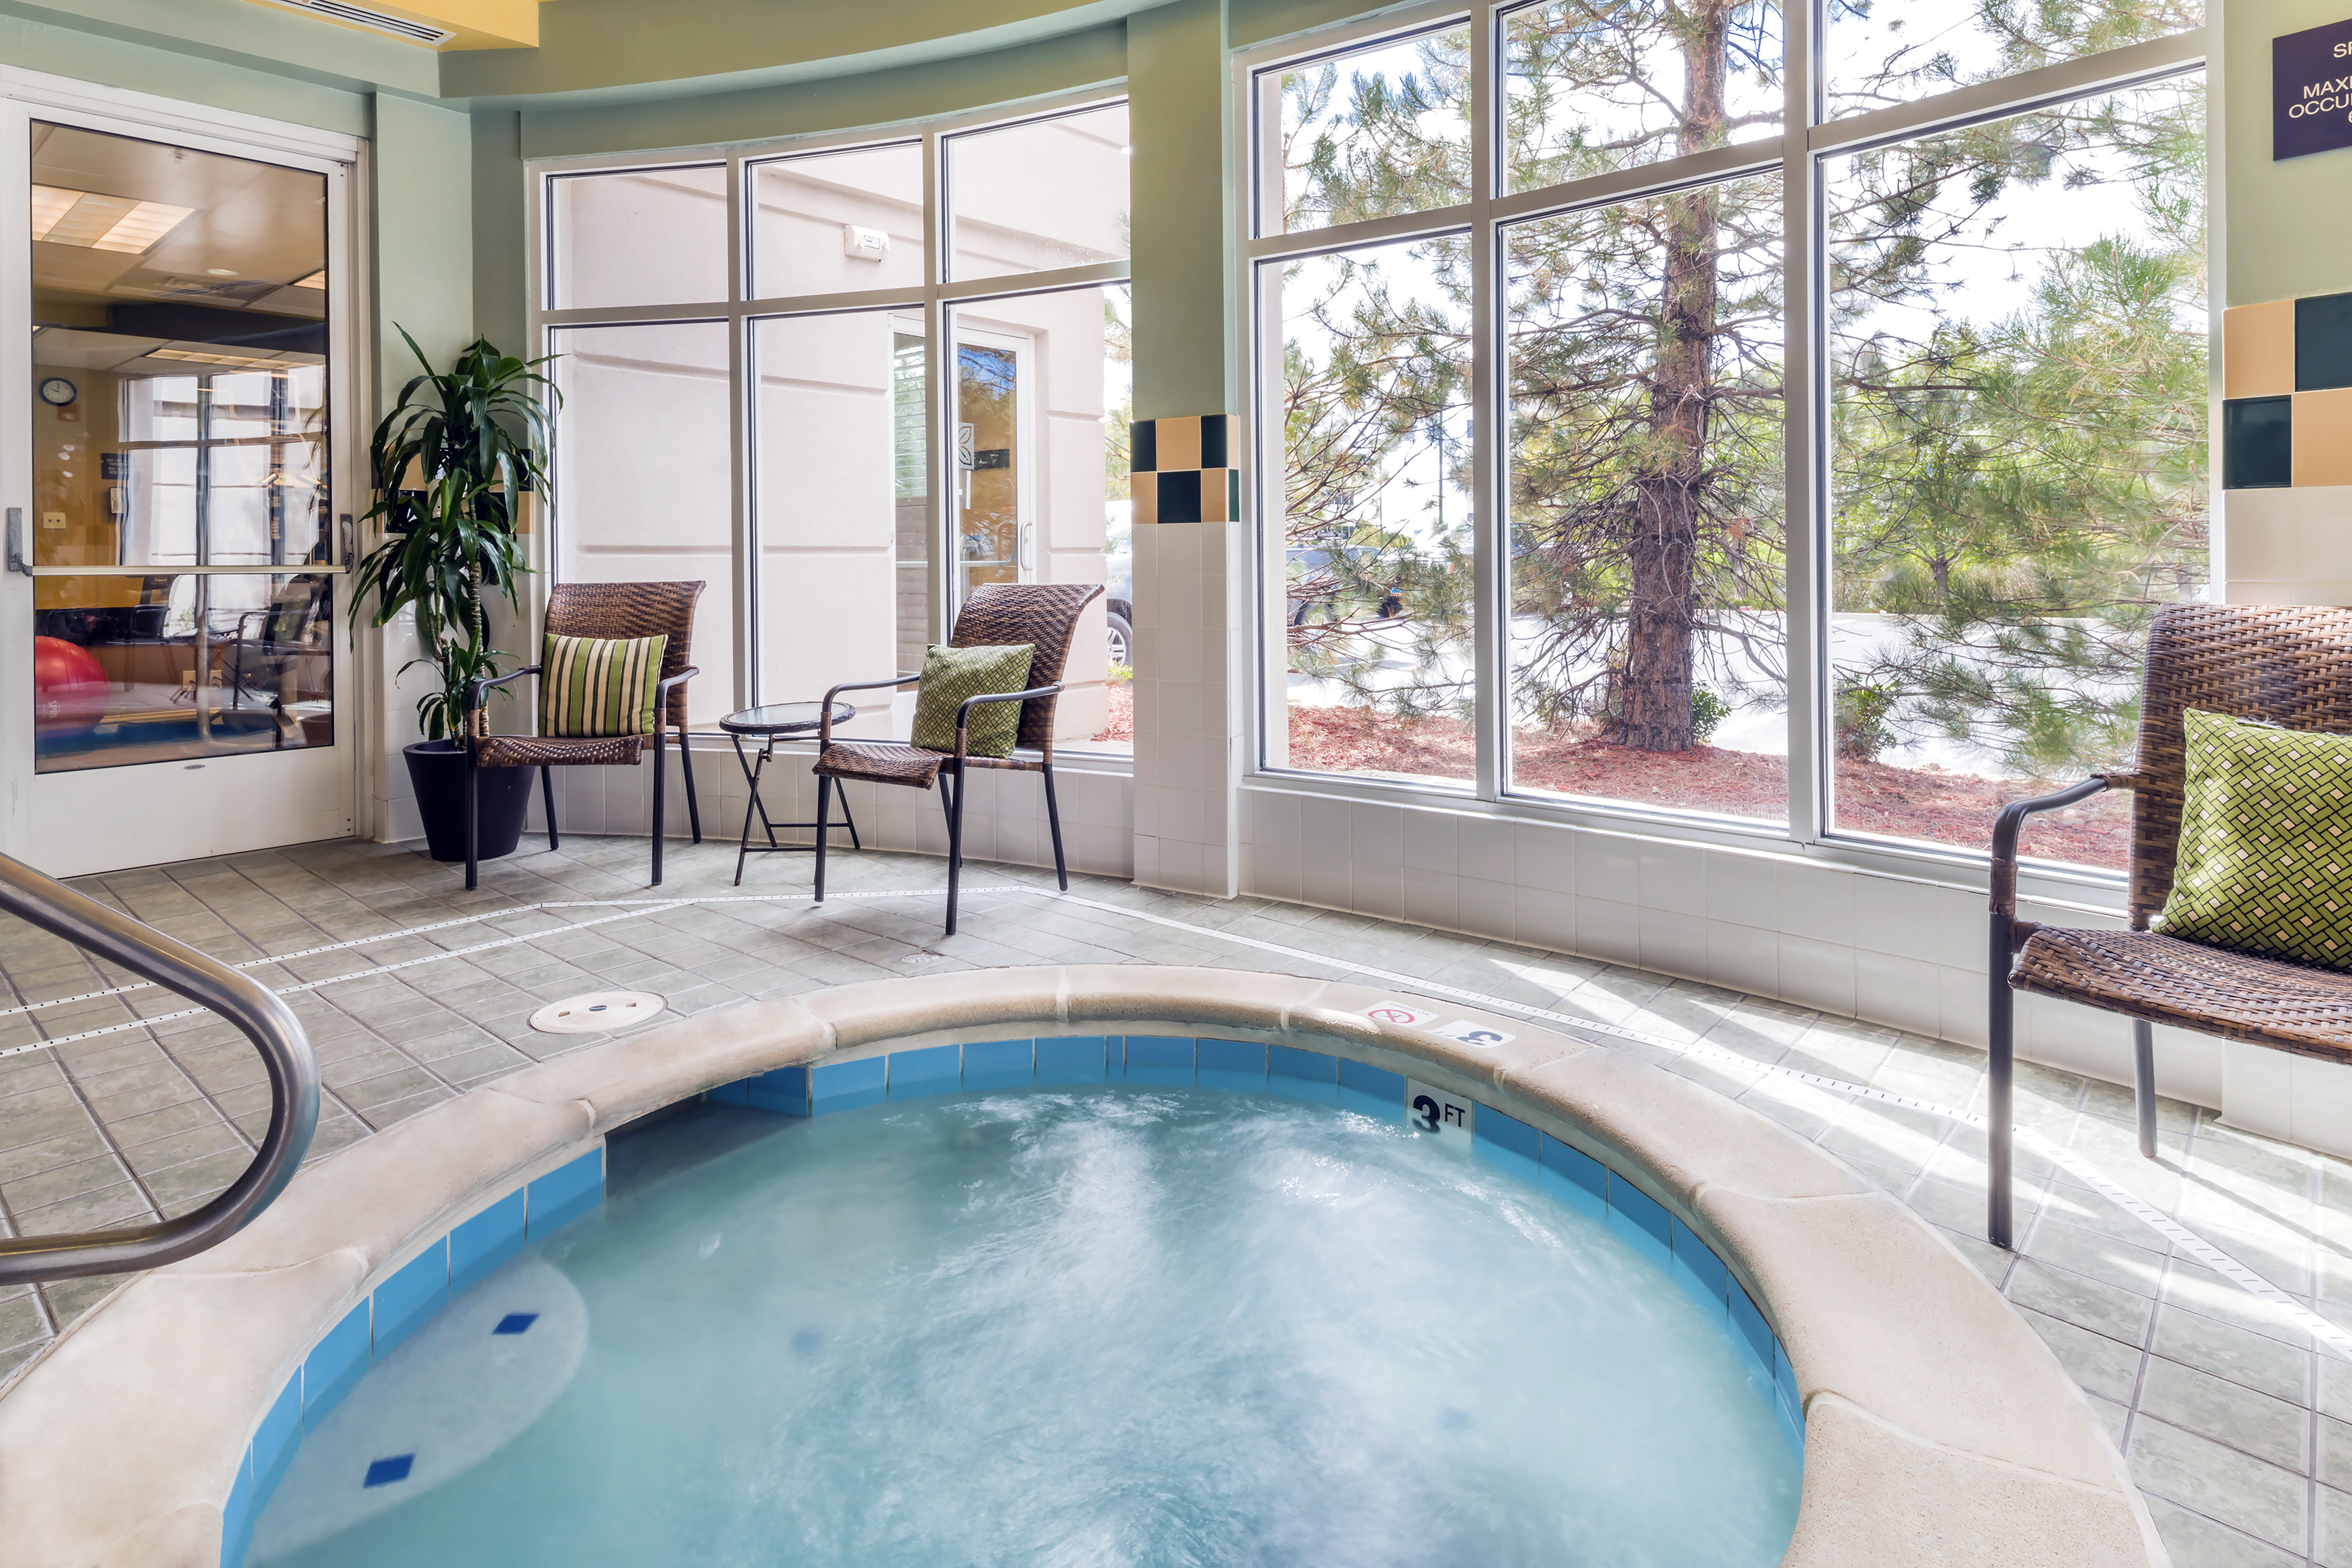 Indoor Whirlpool with View Out Windows in Daytime